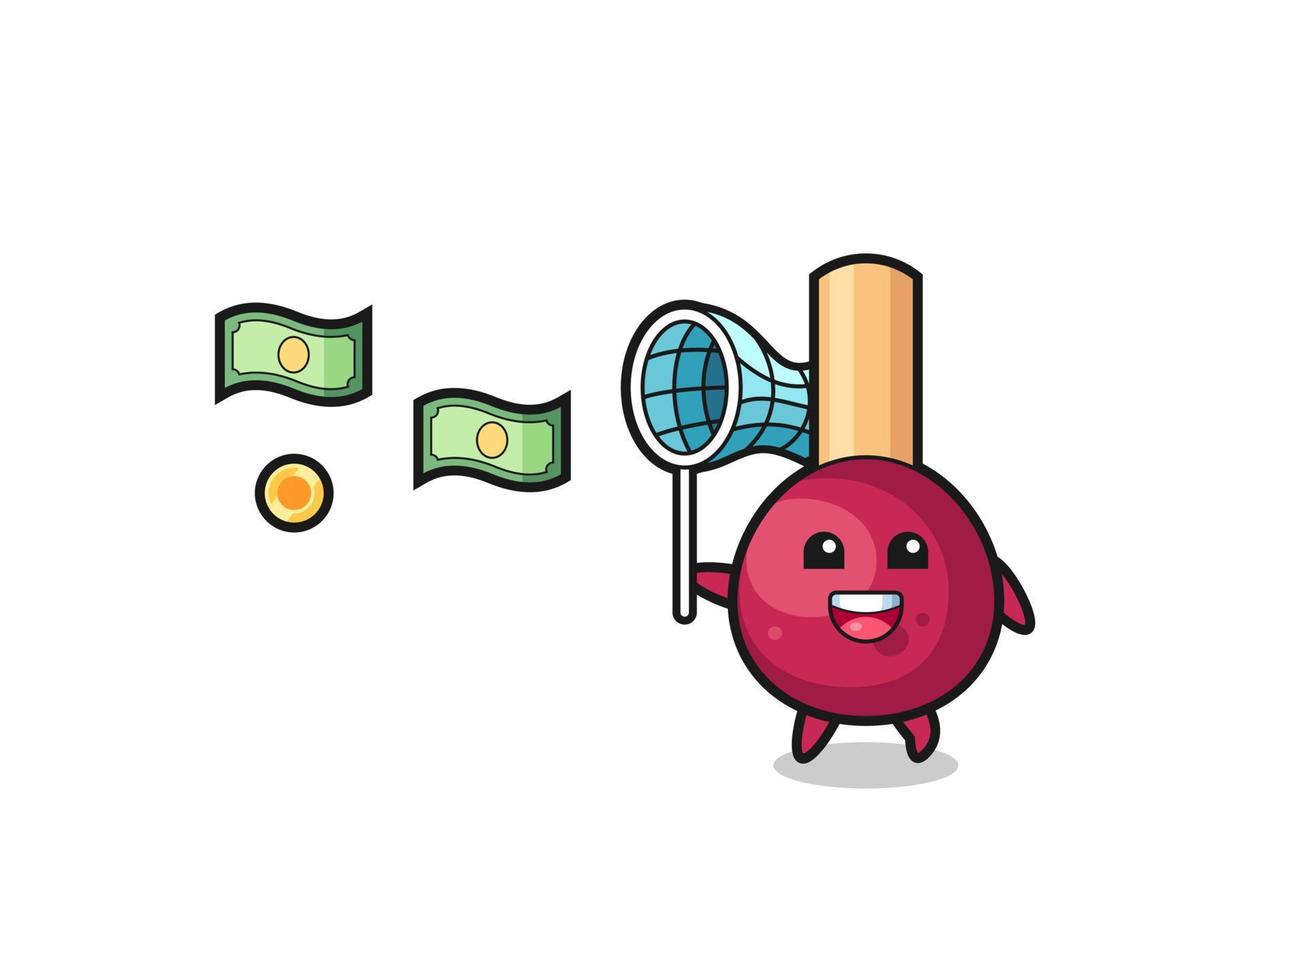 illustration of the matches catching flying money vector